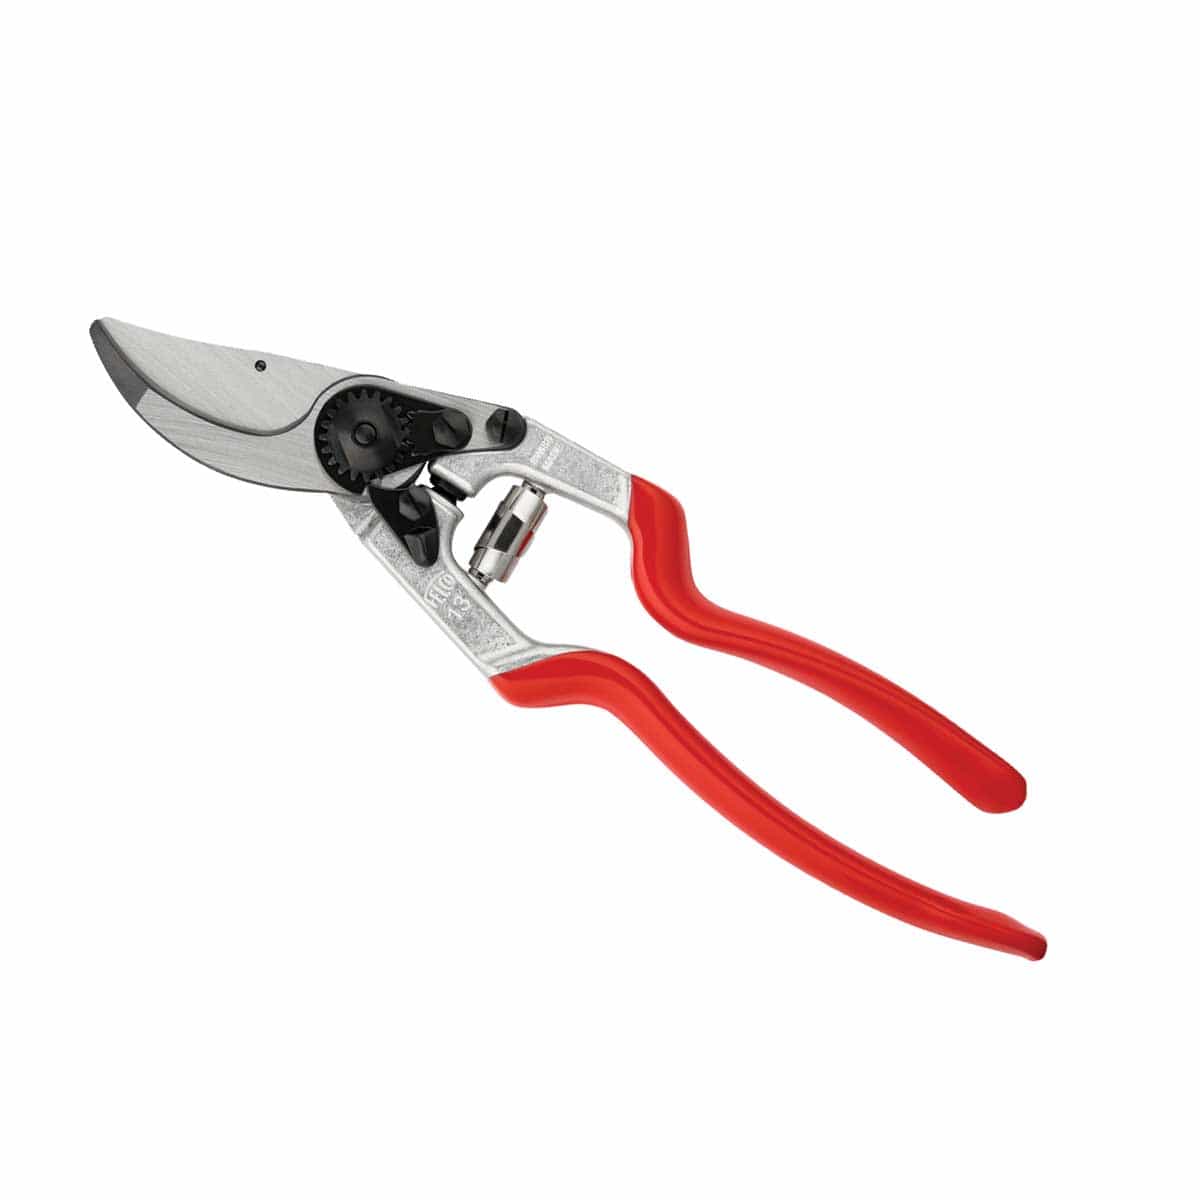 FELCO® 13 Long-Handled, One- or Two-Hand Pruner